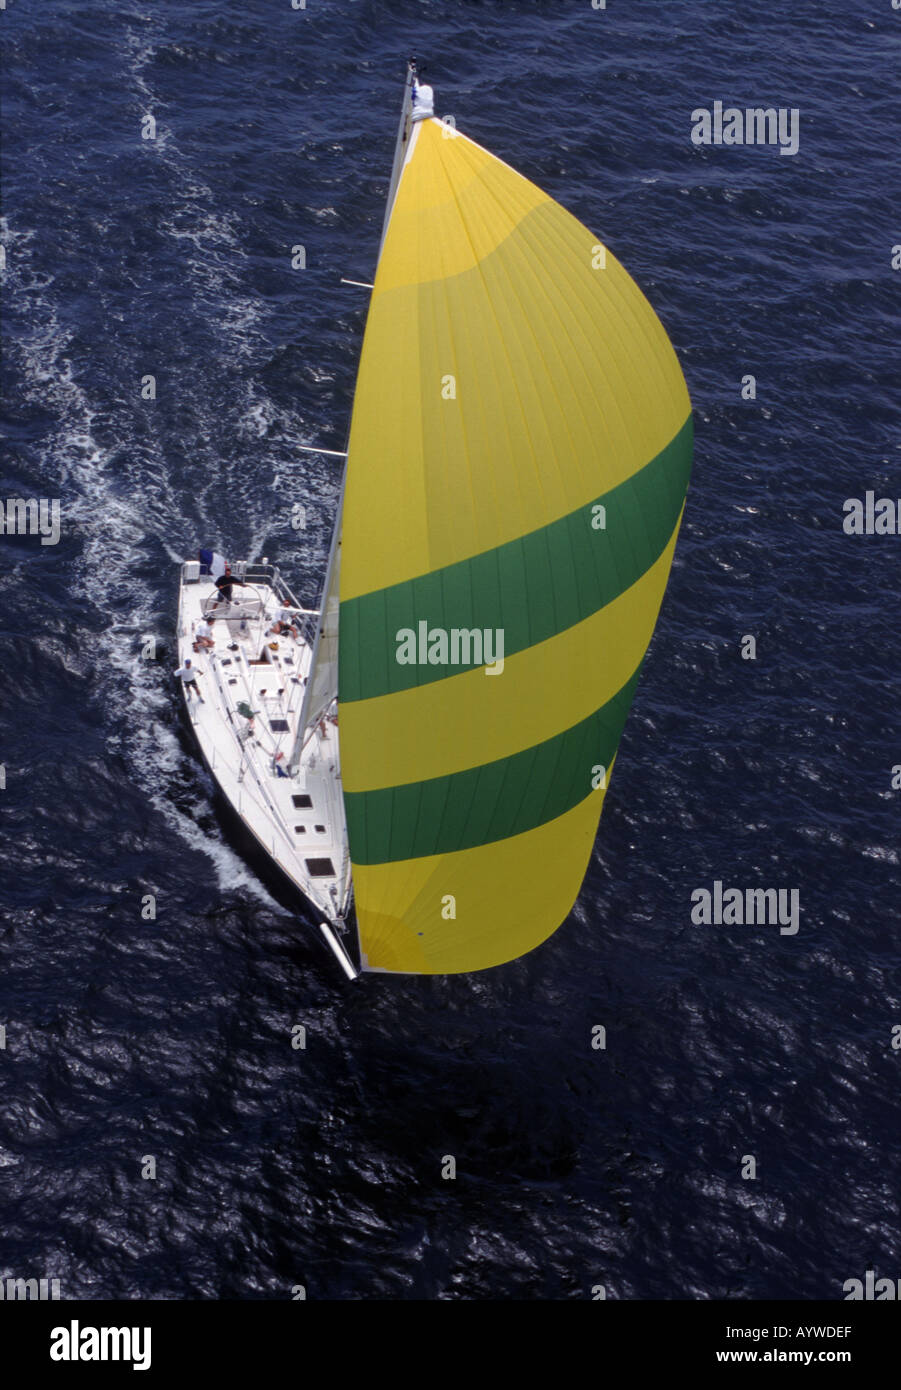 Racing sailboat approaching under spinnaker Aerial view Stock Photo